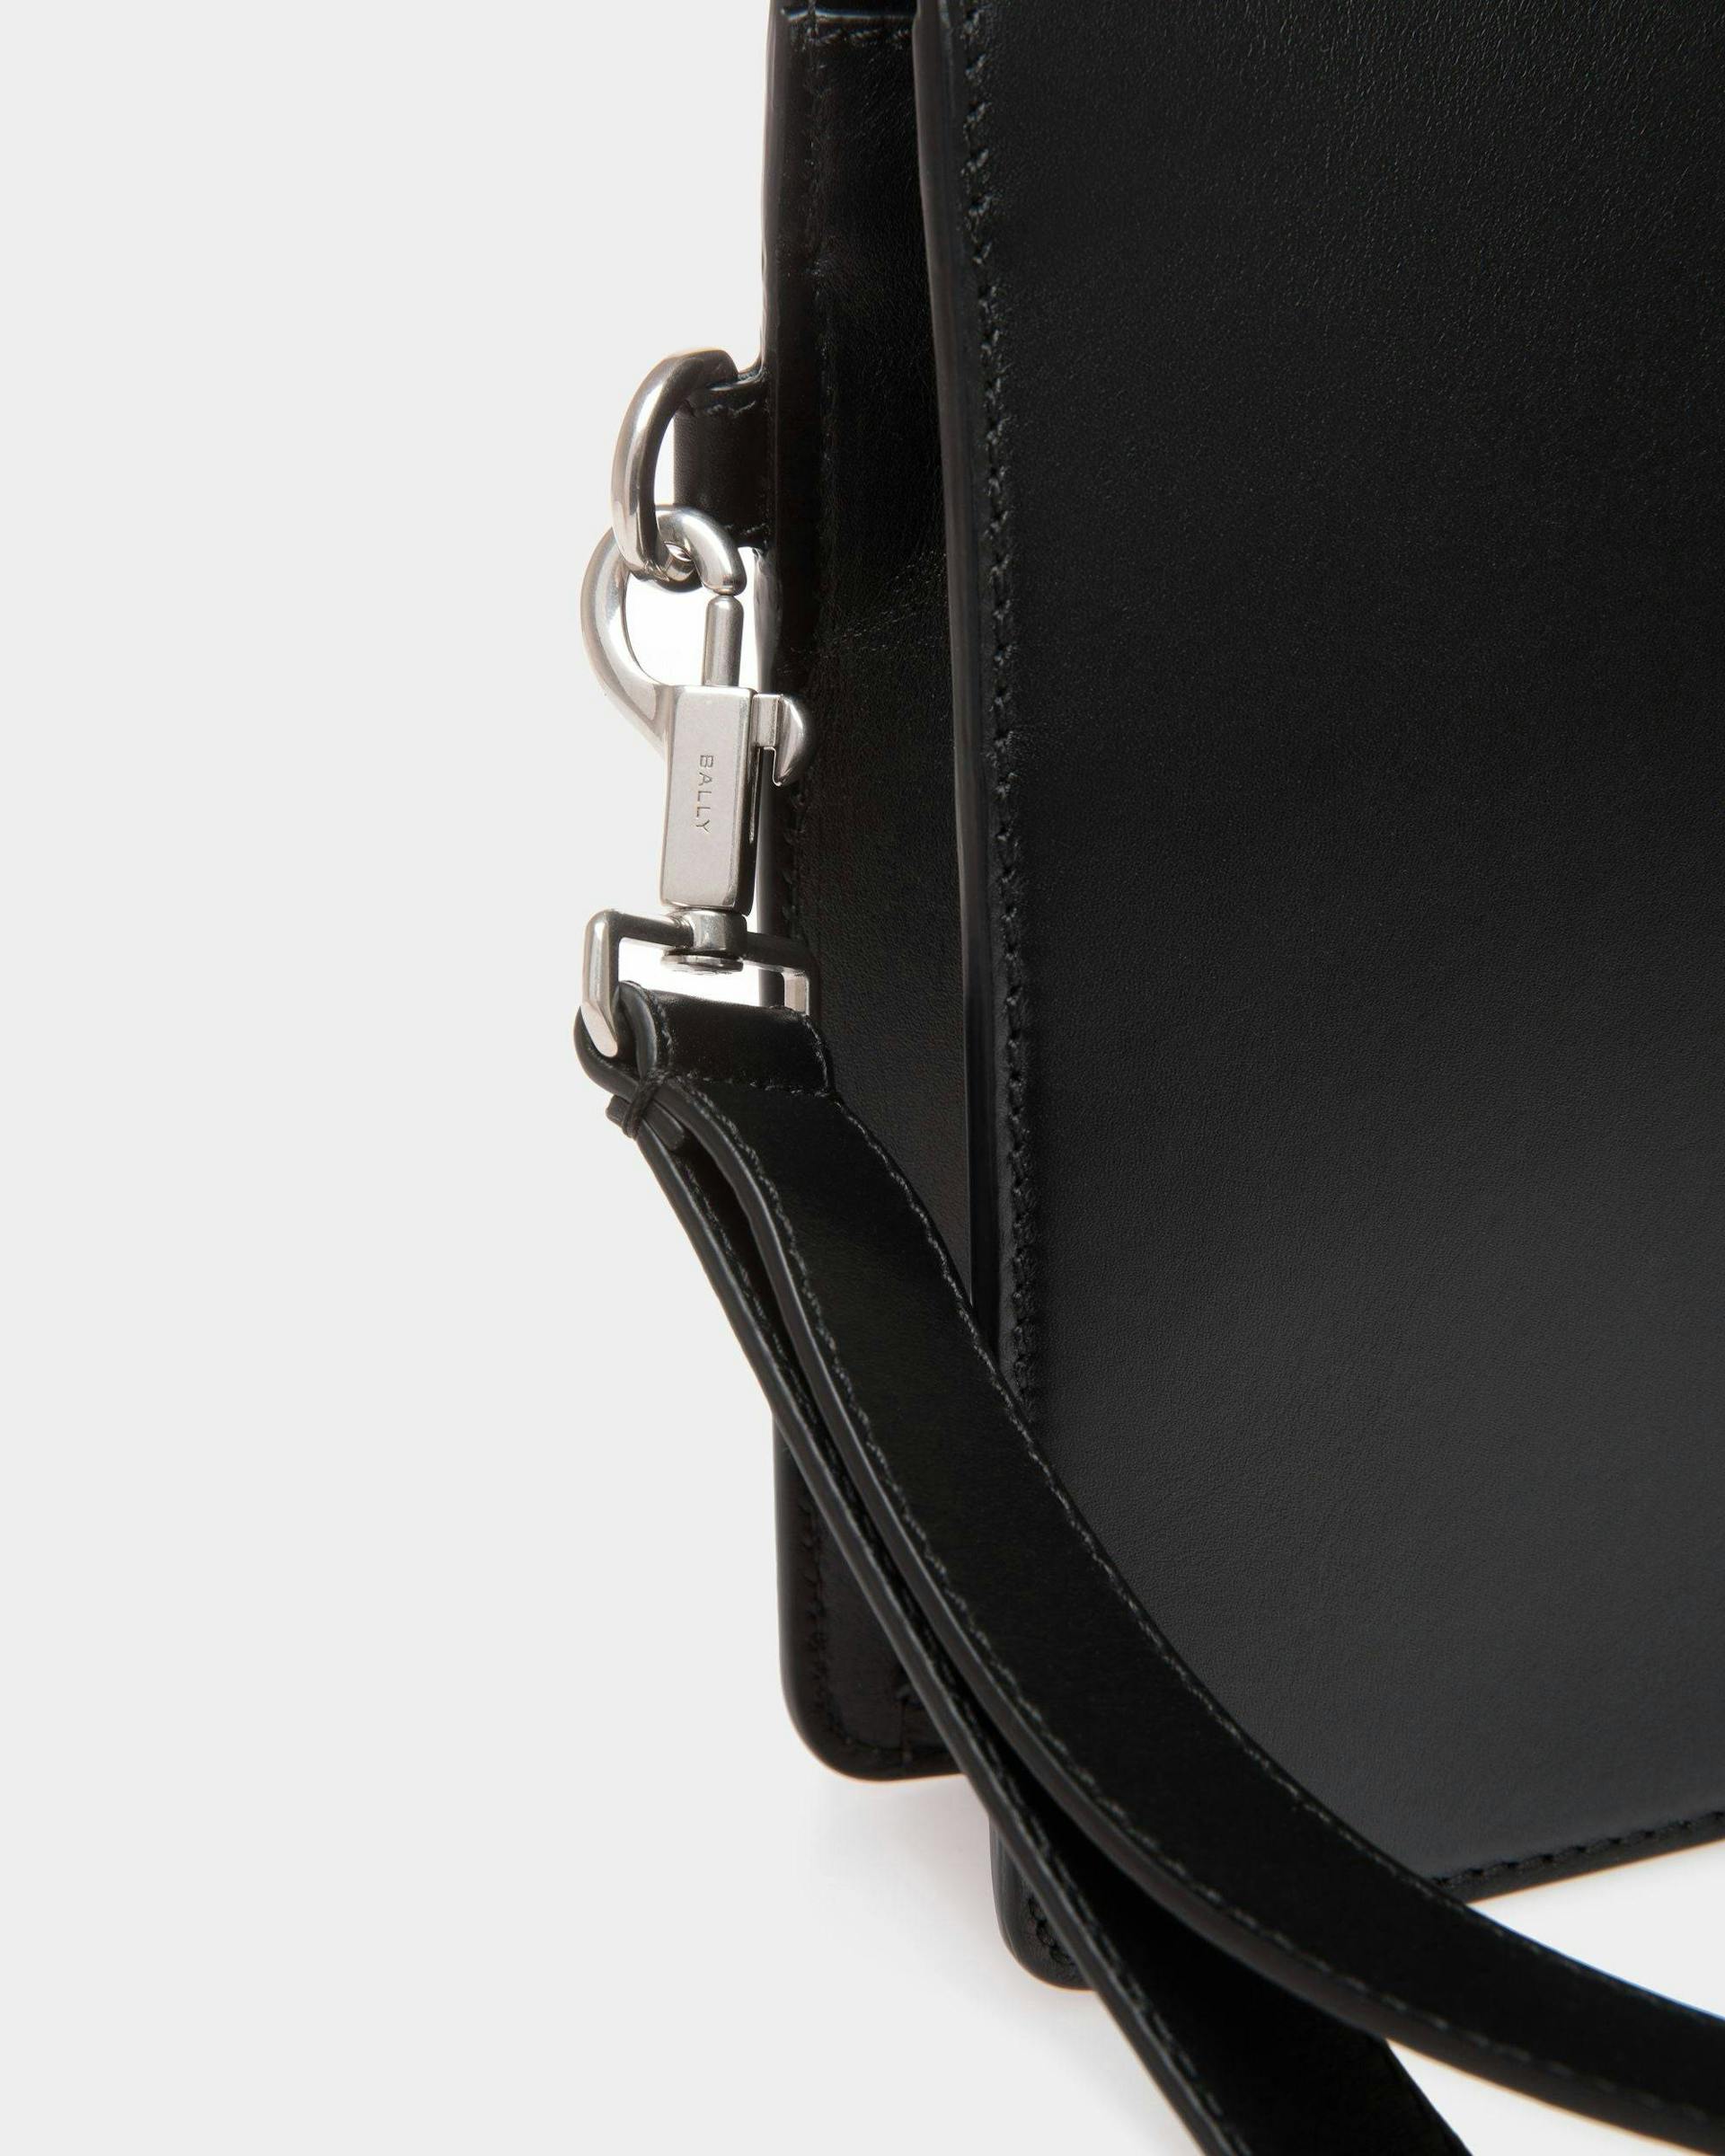 Men's Busy Bally Pouch in Black Leather | Bally | Still Life Detail